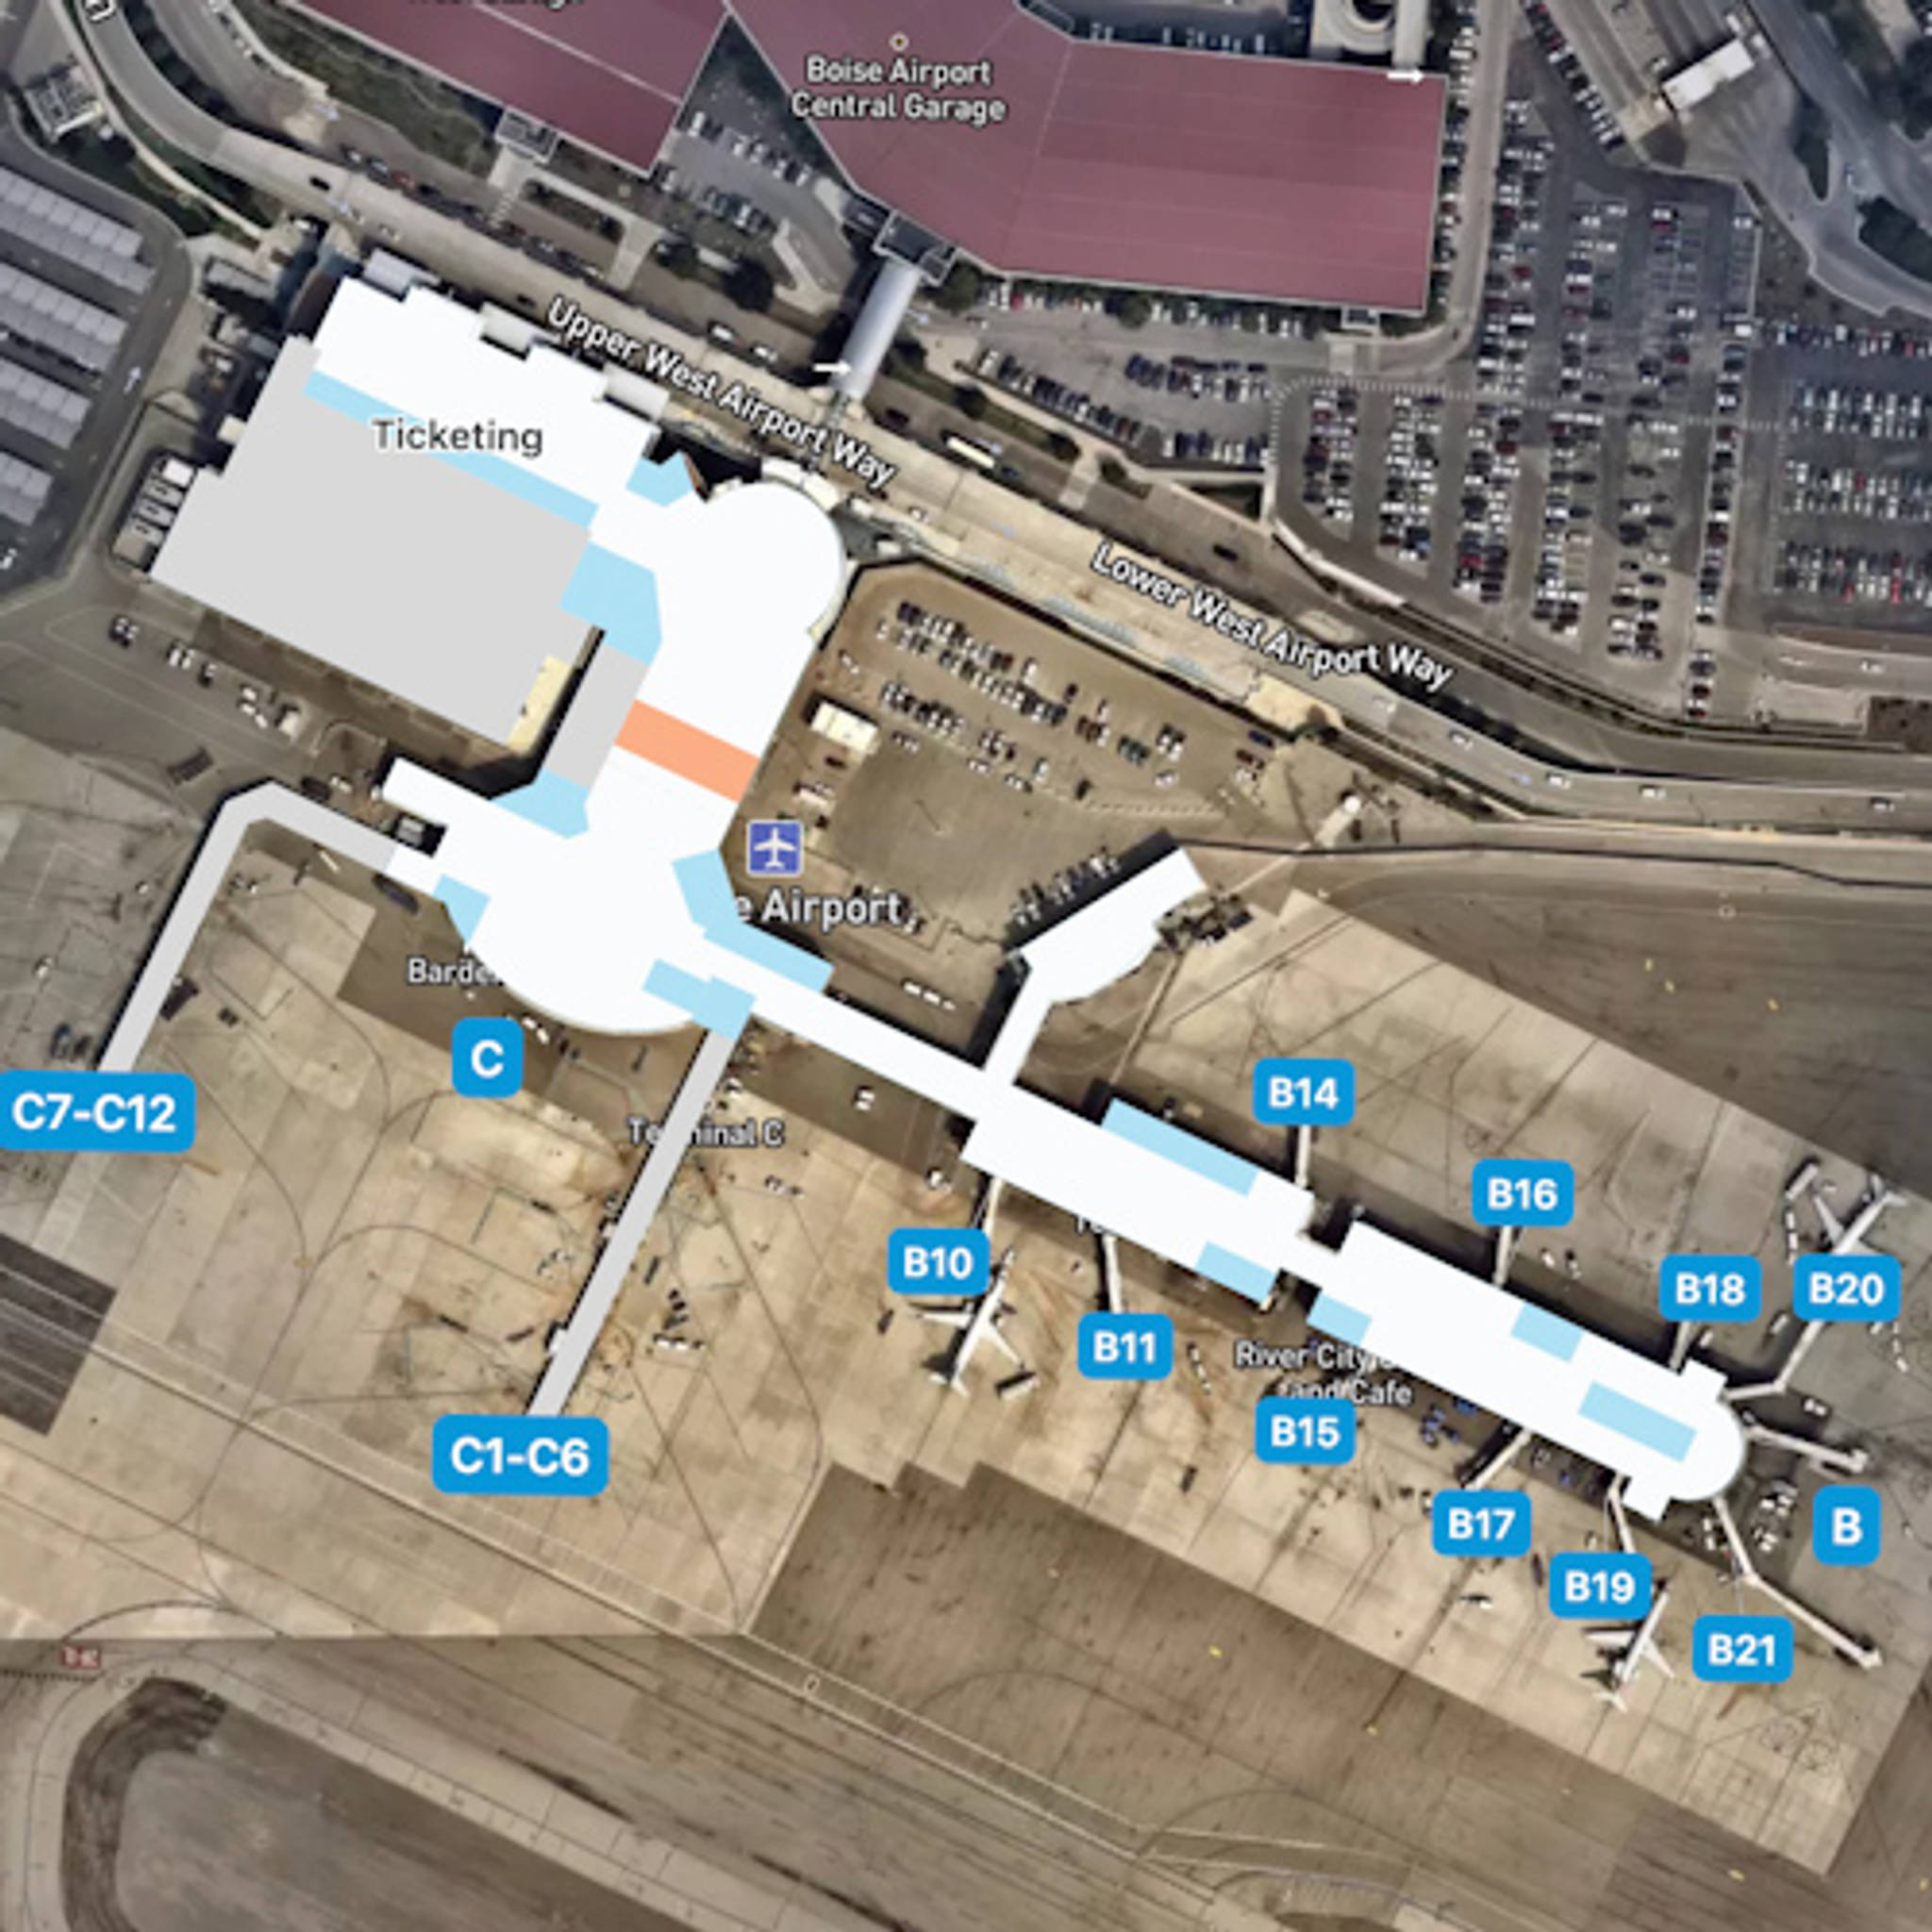 Boise Airport BOI Terminal Overview Map